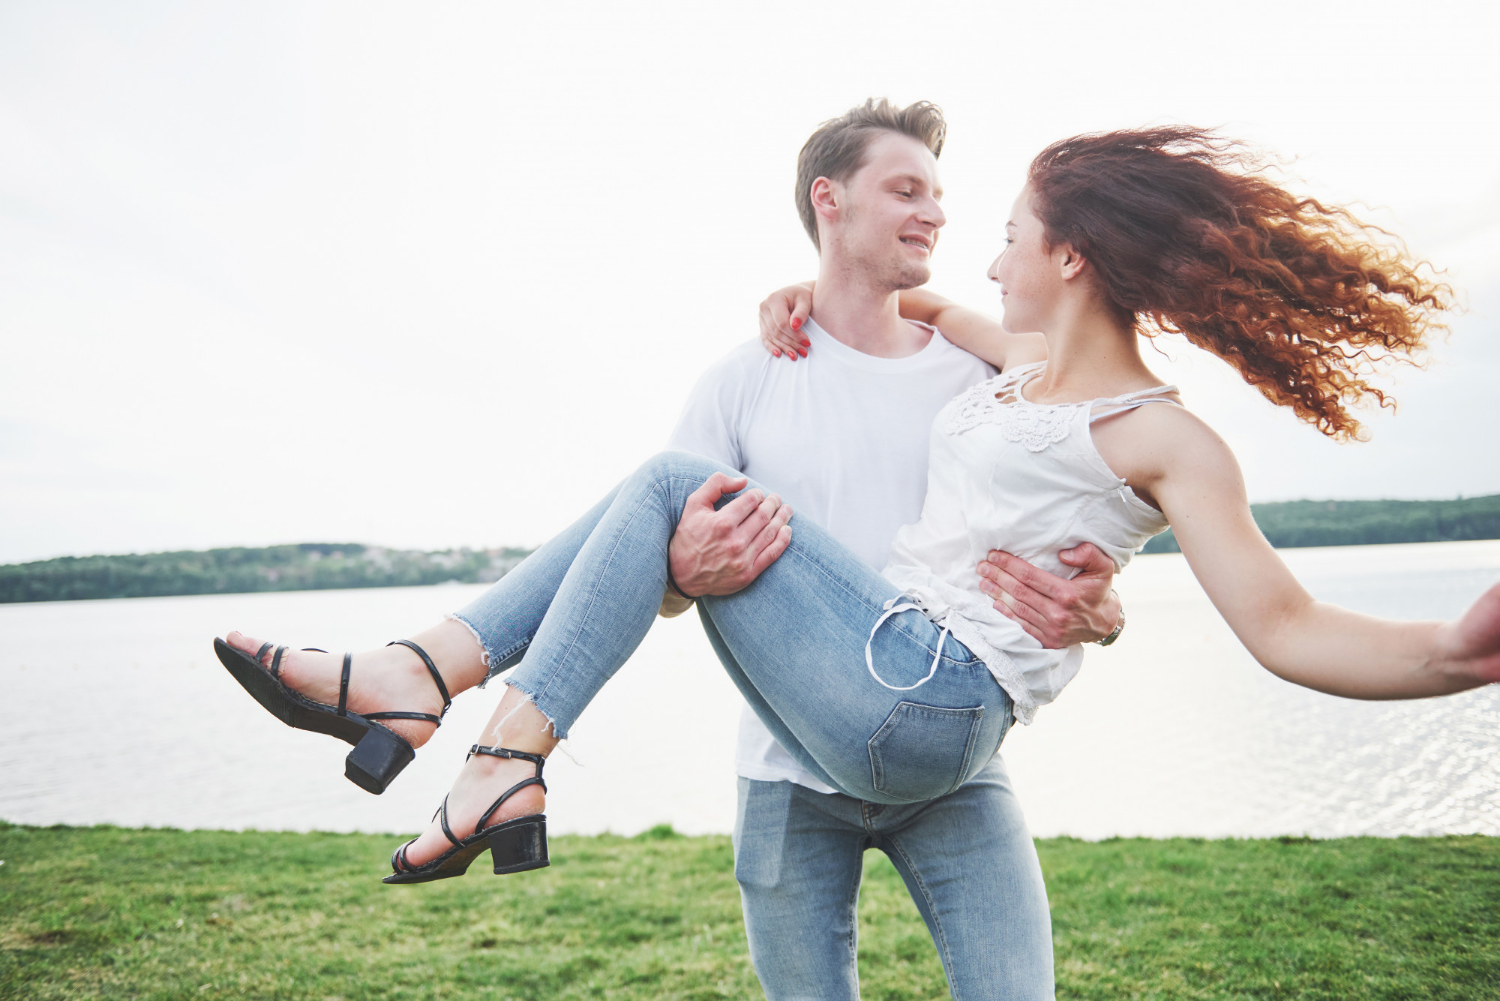 45 Fun Hobbies for Couples to Strengthen Your Bond